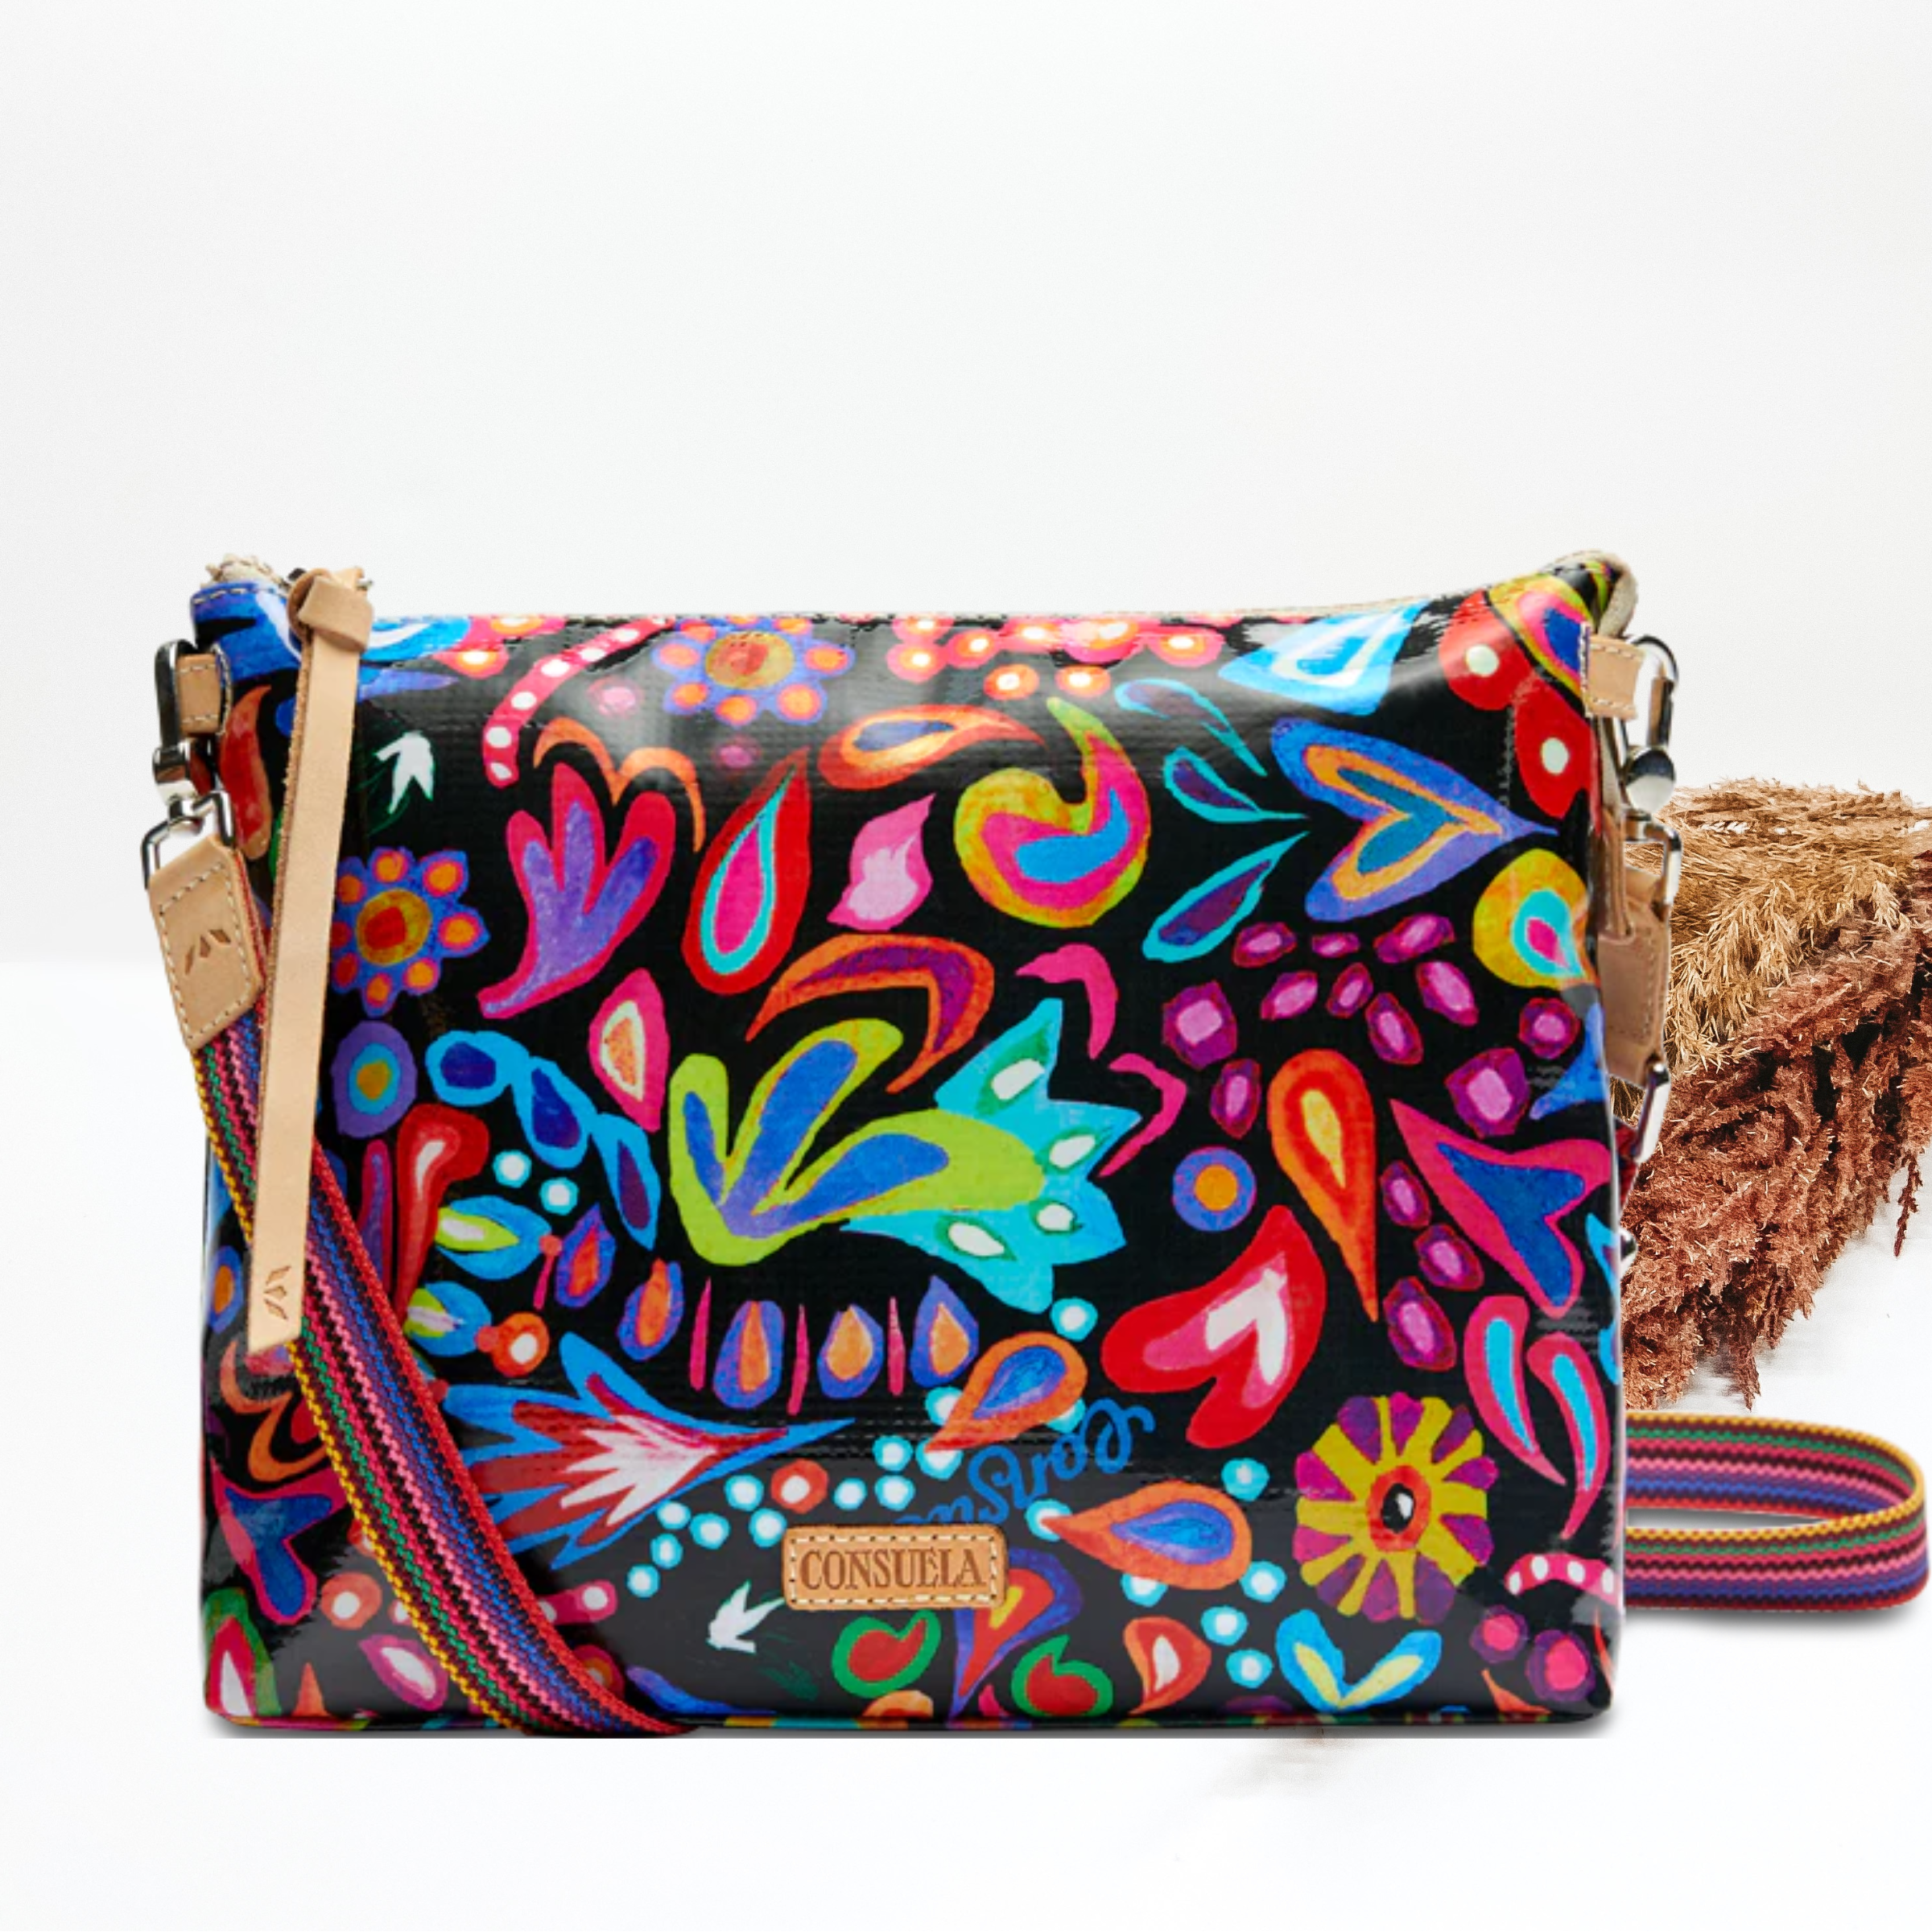 A black crossbody bag with multicolor floral and paisley print. Pictured on white background with brown pompous grass on the right side.